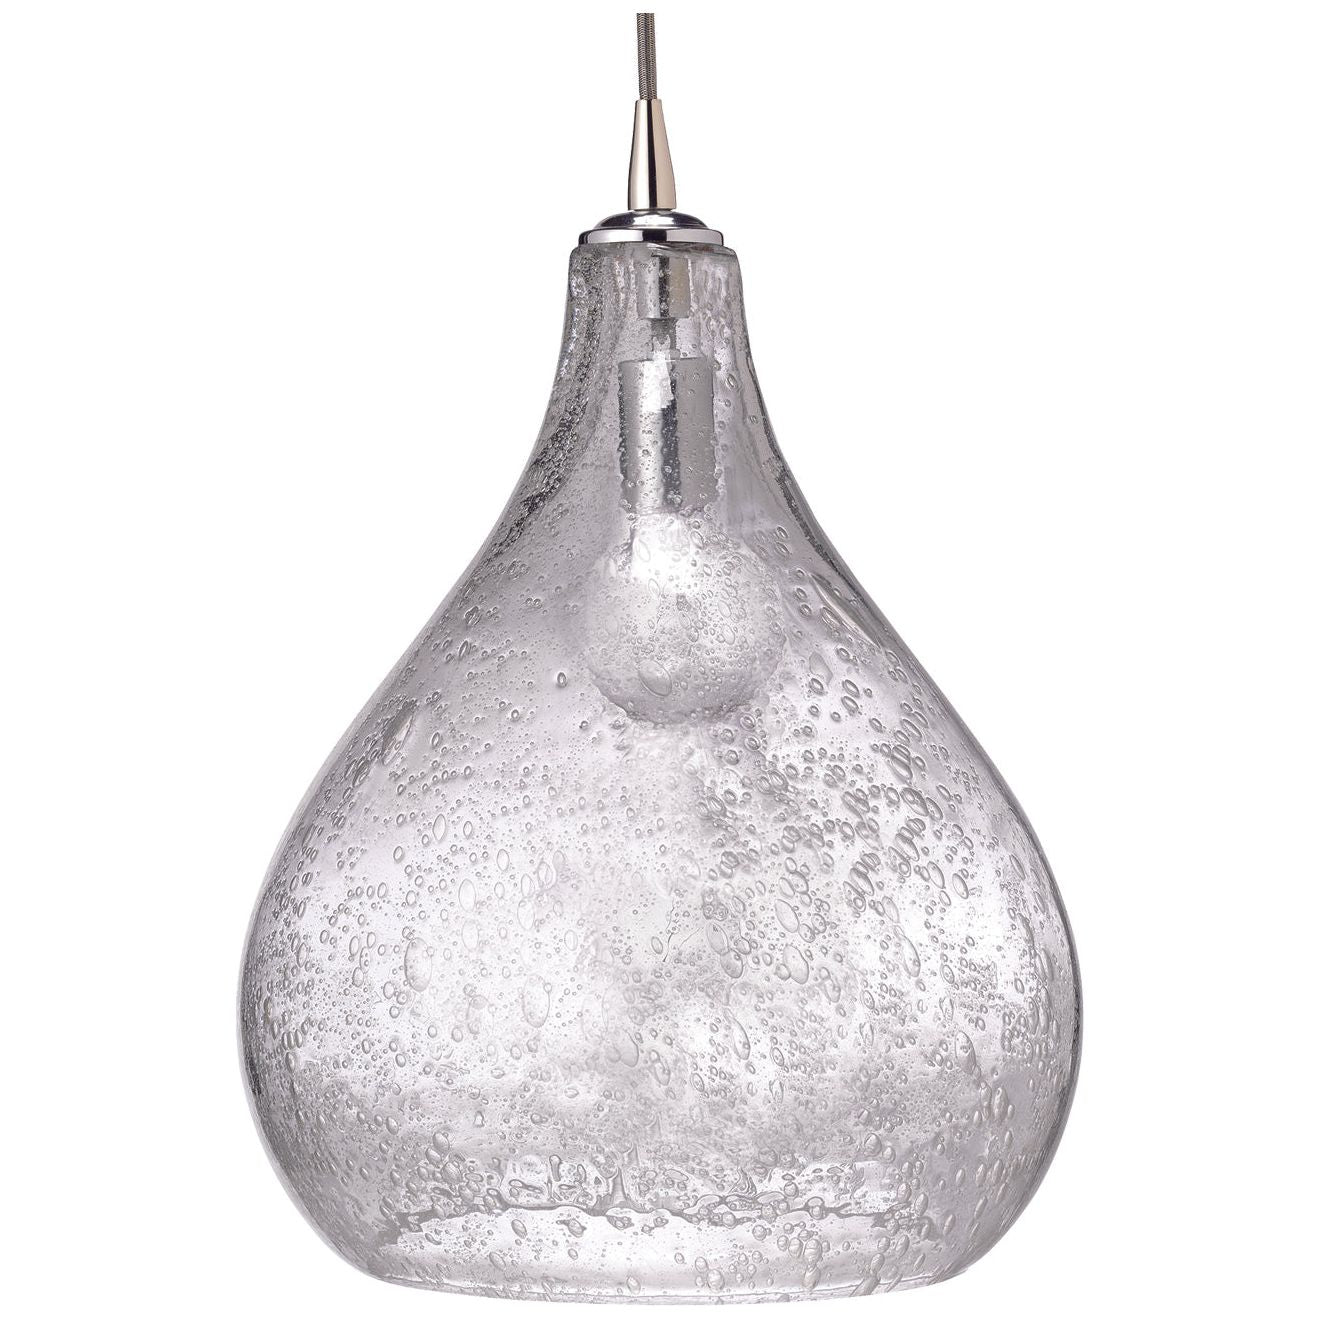 Jamie Young Company - 5CURV-LGCL - Curved Pendant - Curved - Clear 